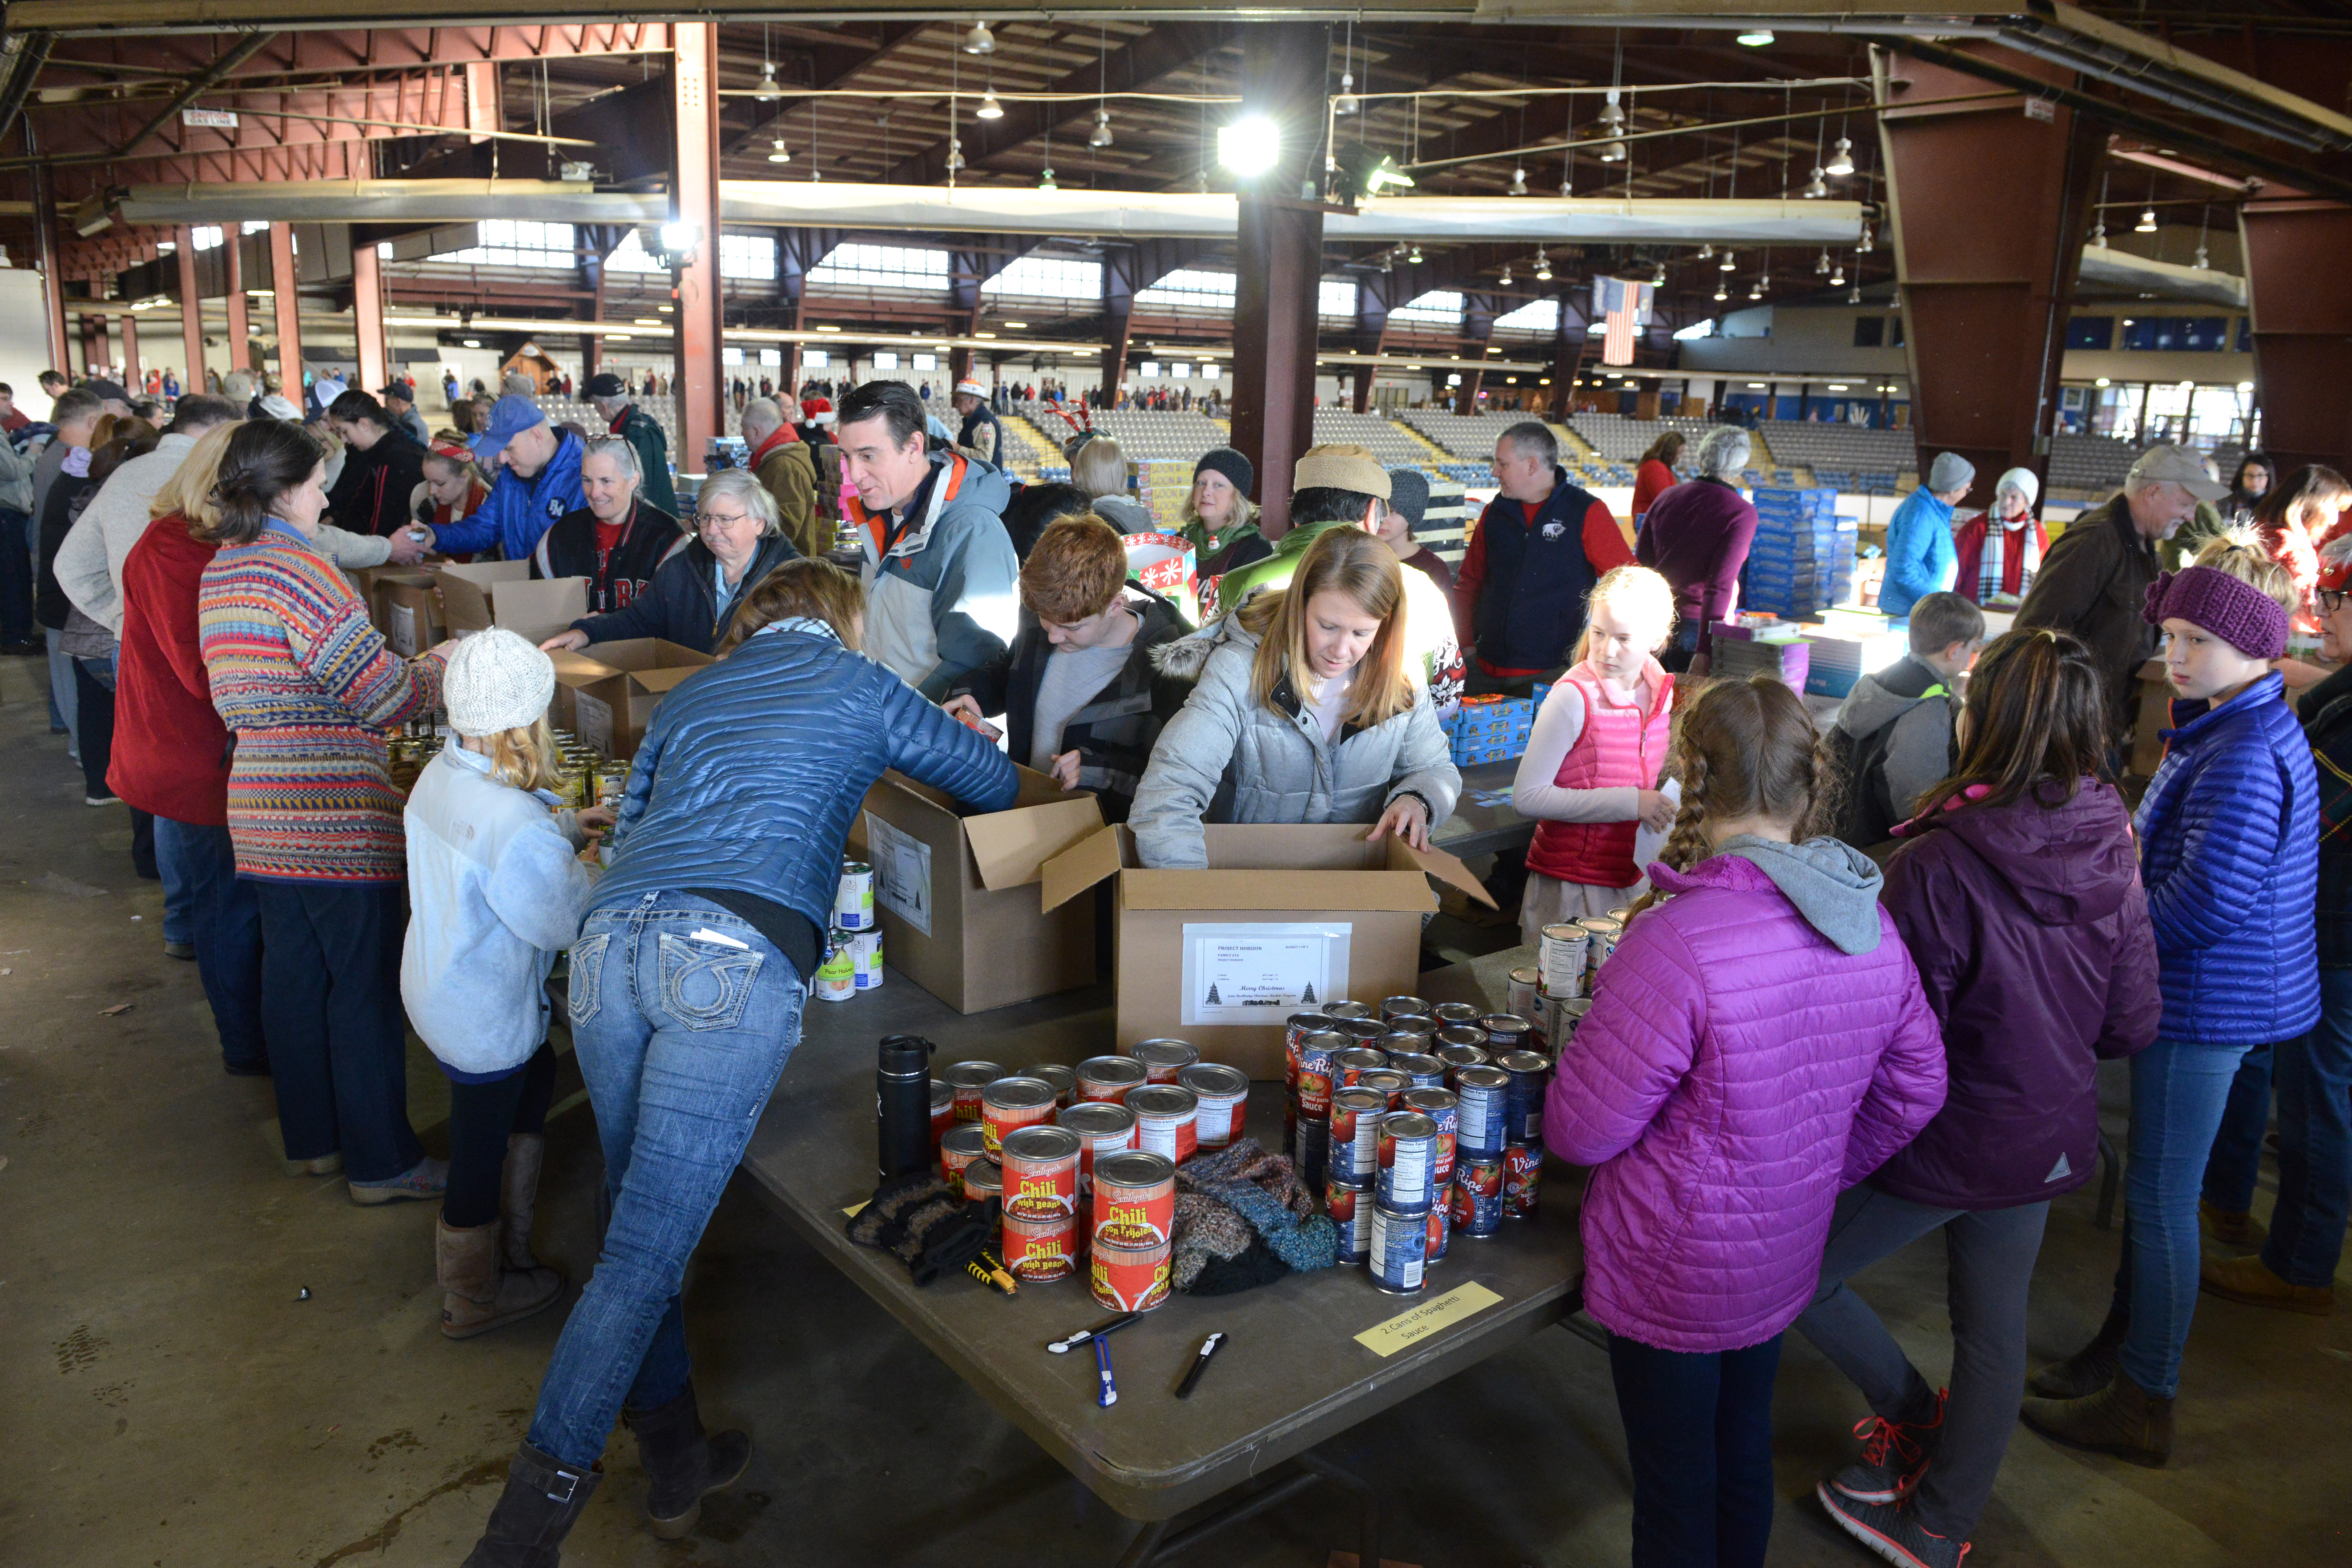 Big group of volunteers, young and old, dressed warmly, working together to pack canned goods into boxes.